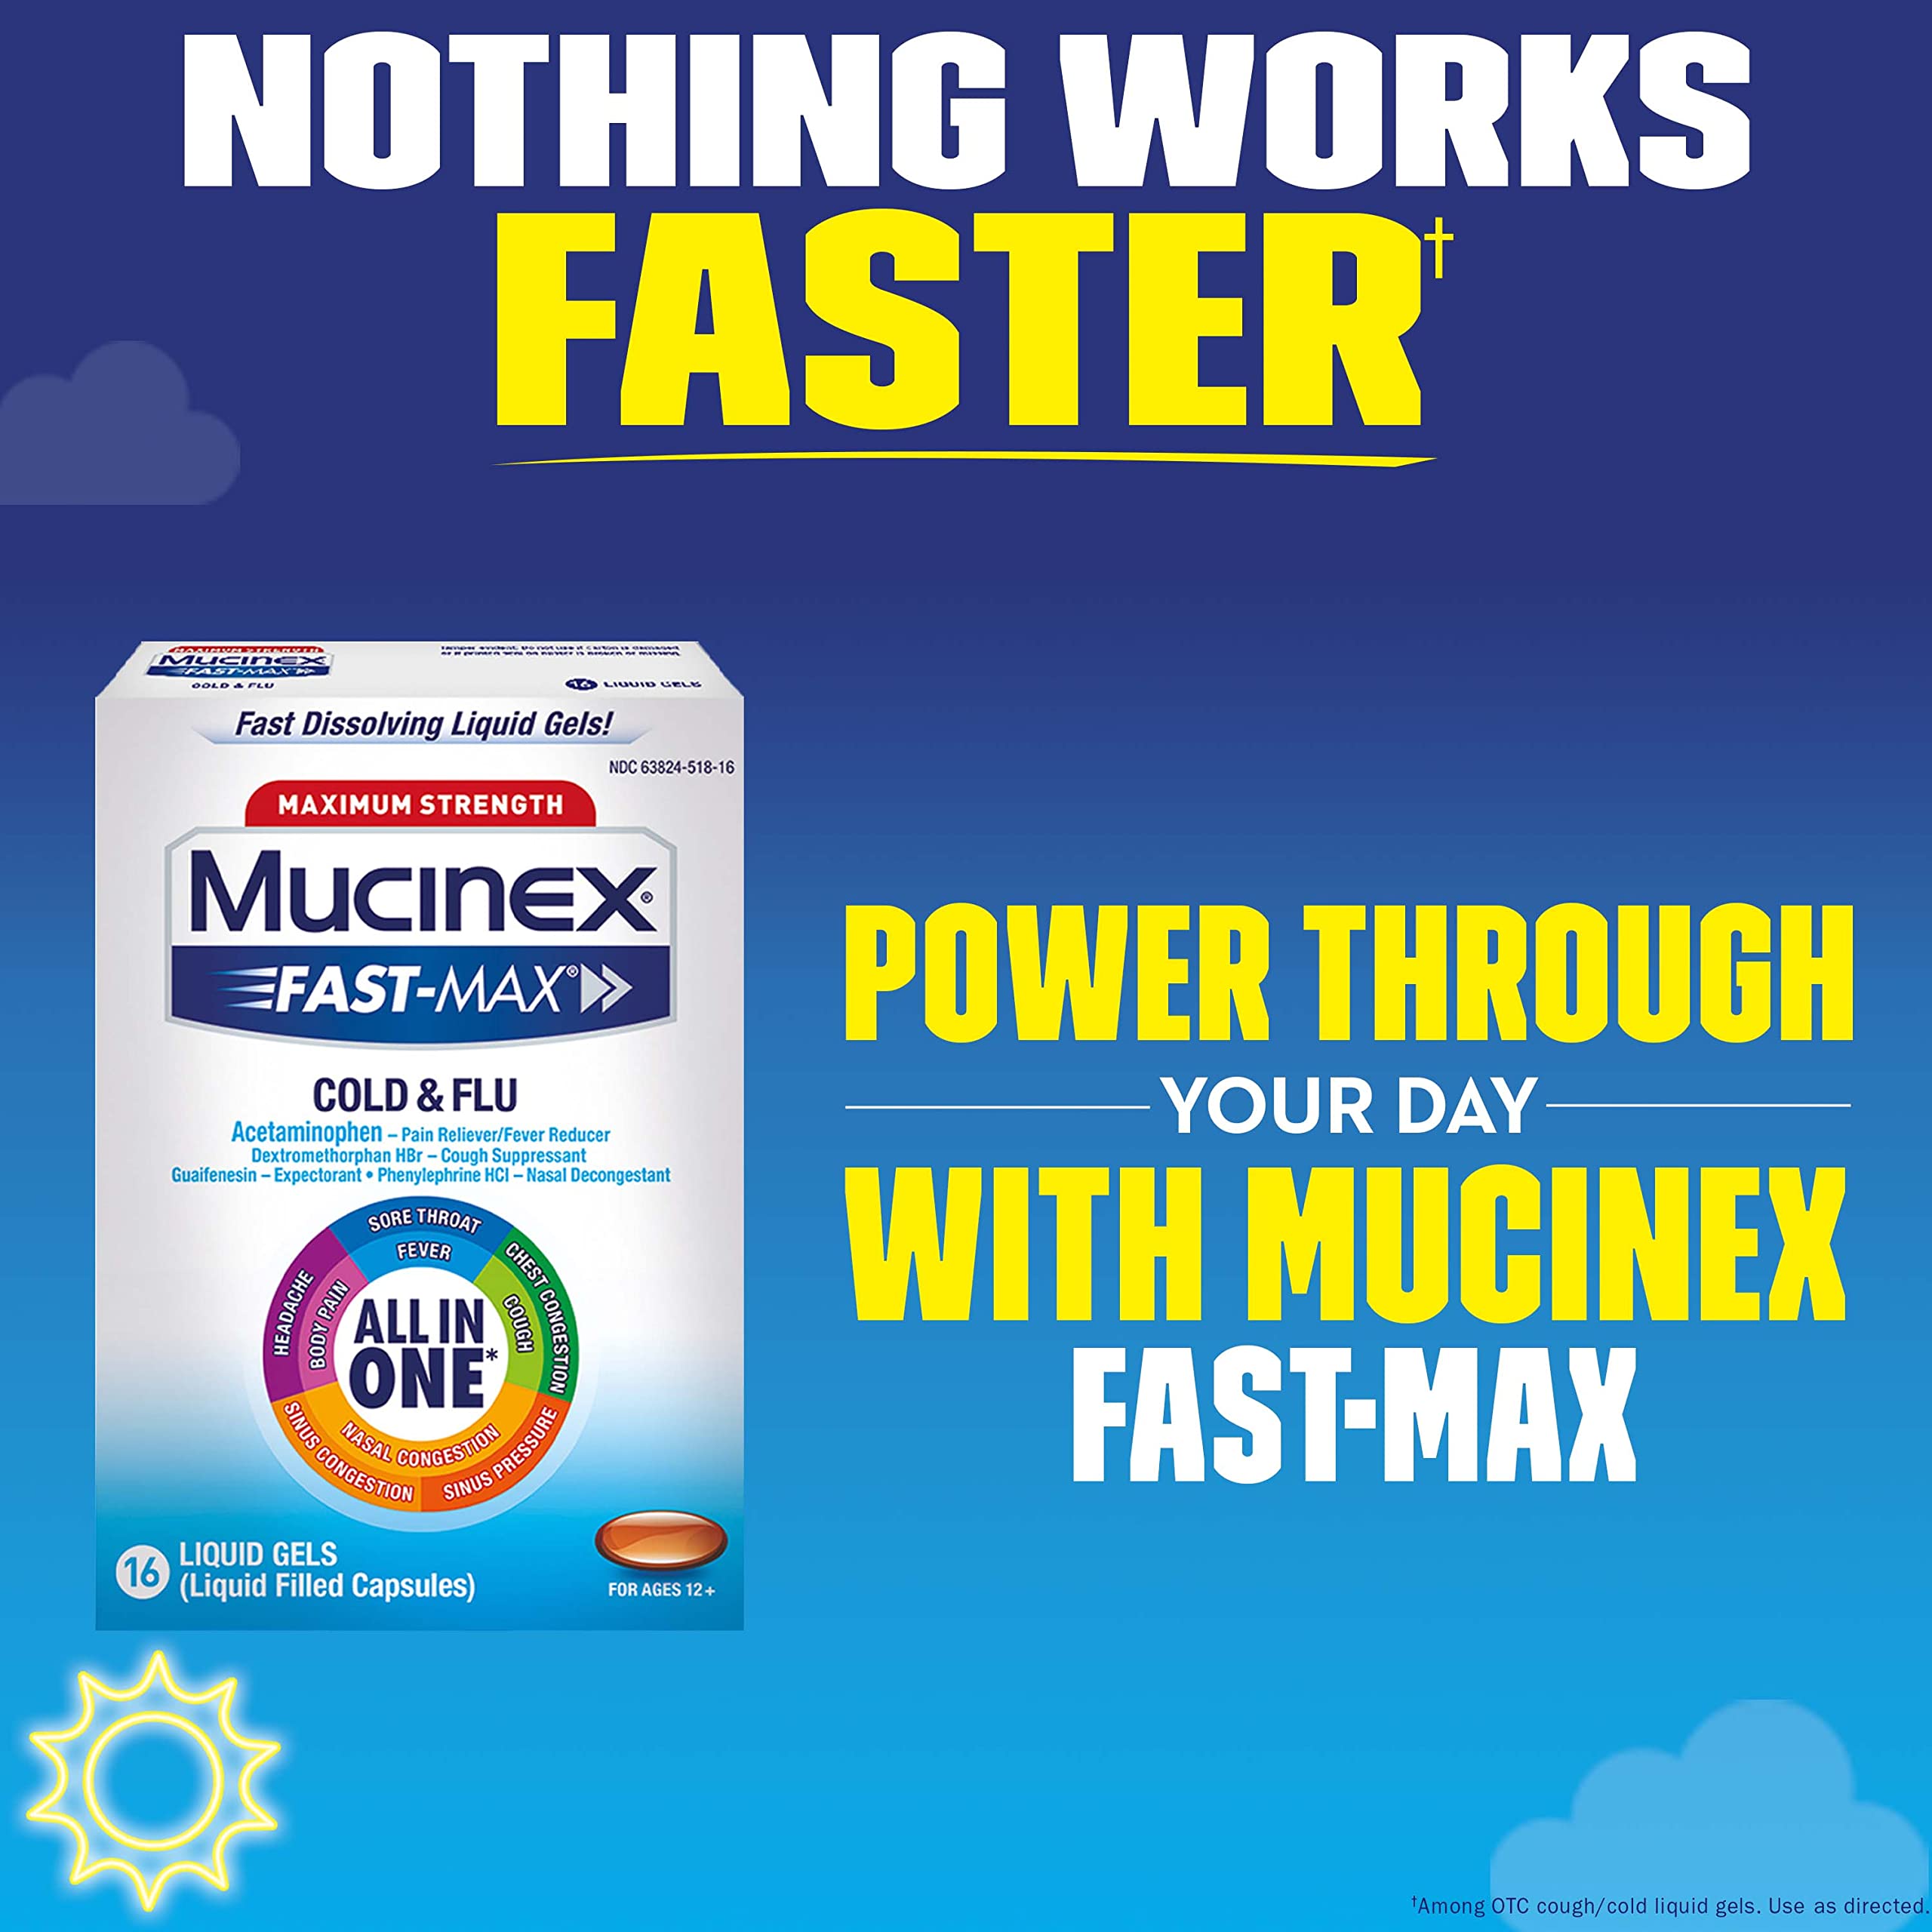 Mucinex Maximum Strength Fast-Max Cold & Flu All-in-One Liquid Gels, 16ct (Packaging May Vary) (Pack of 2)